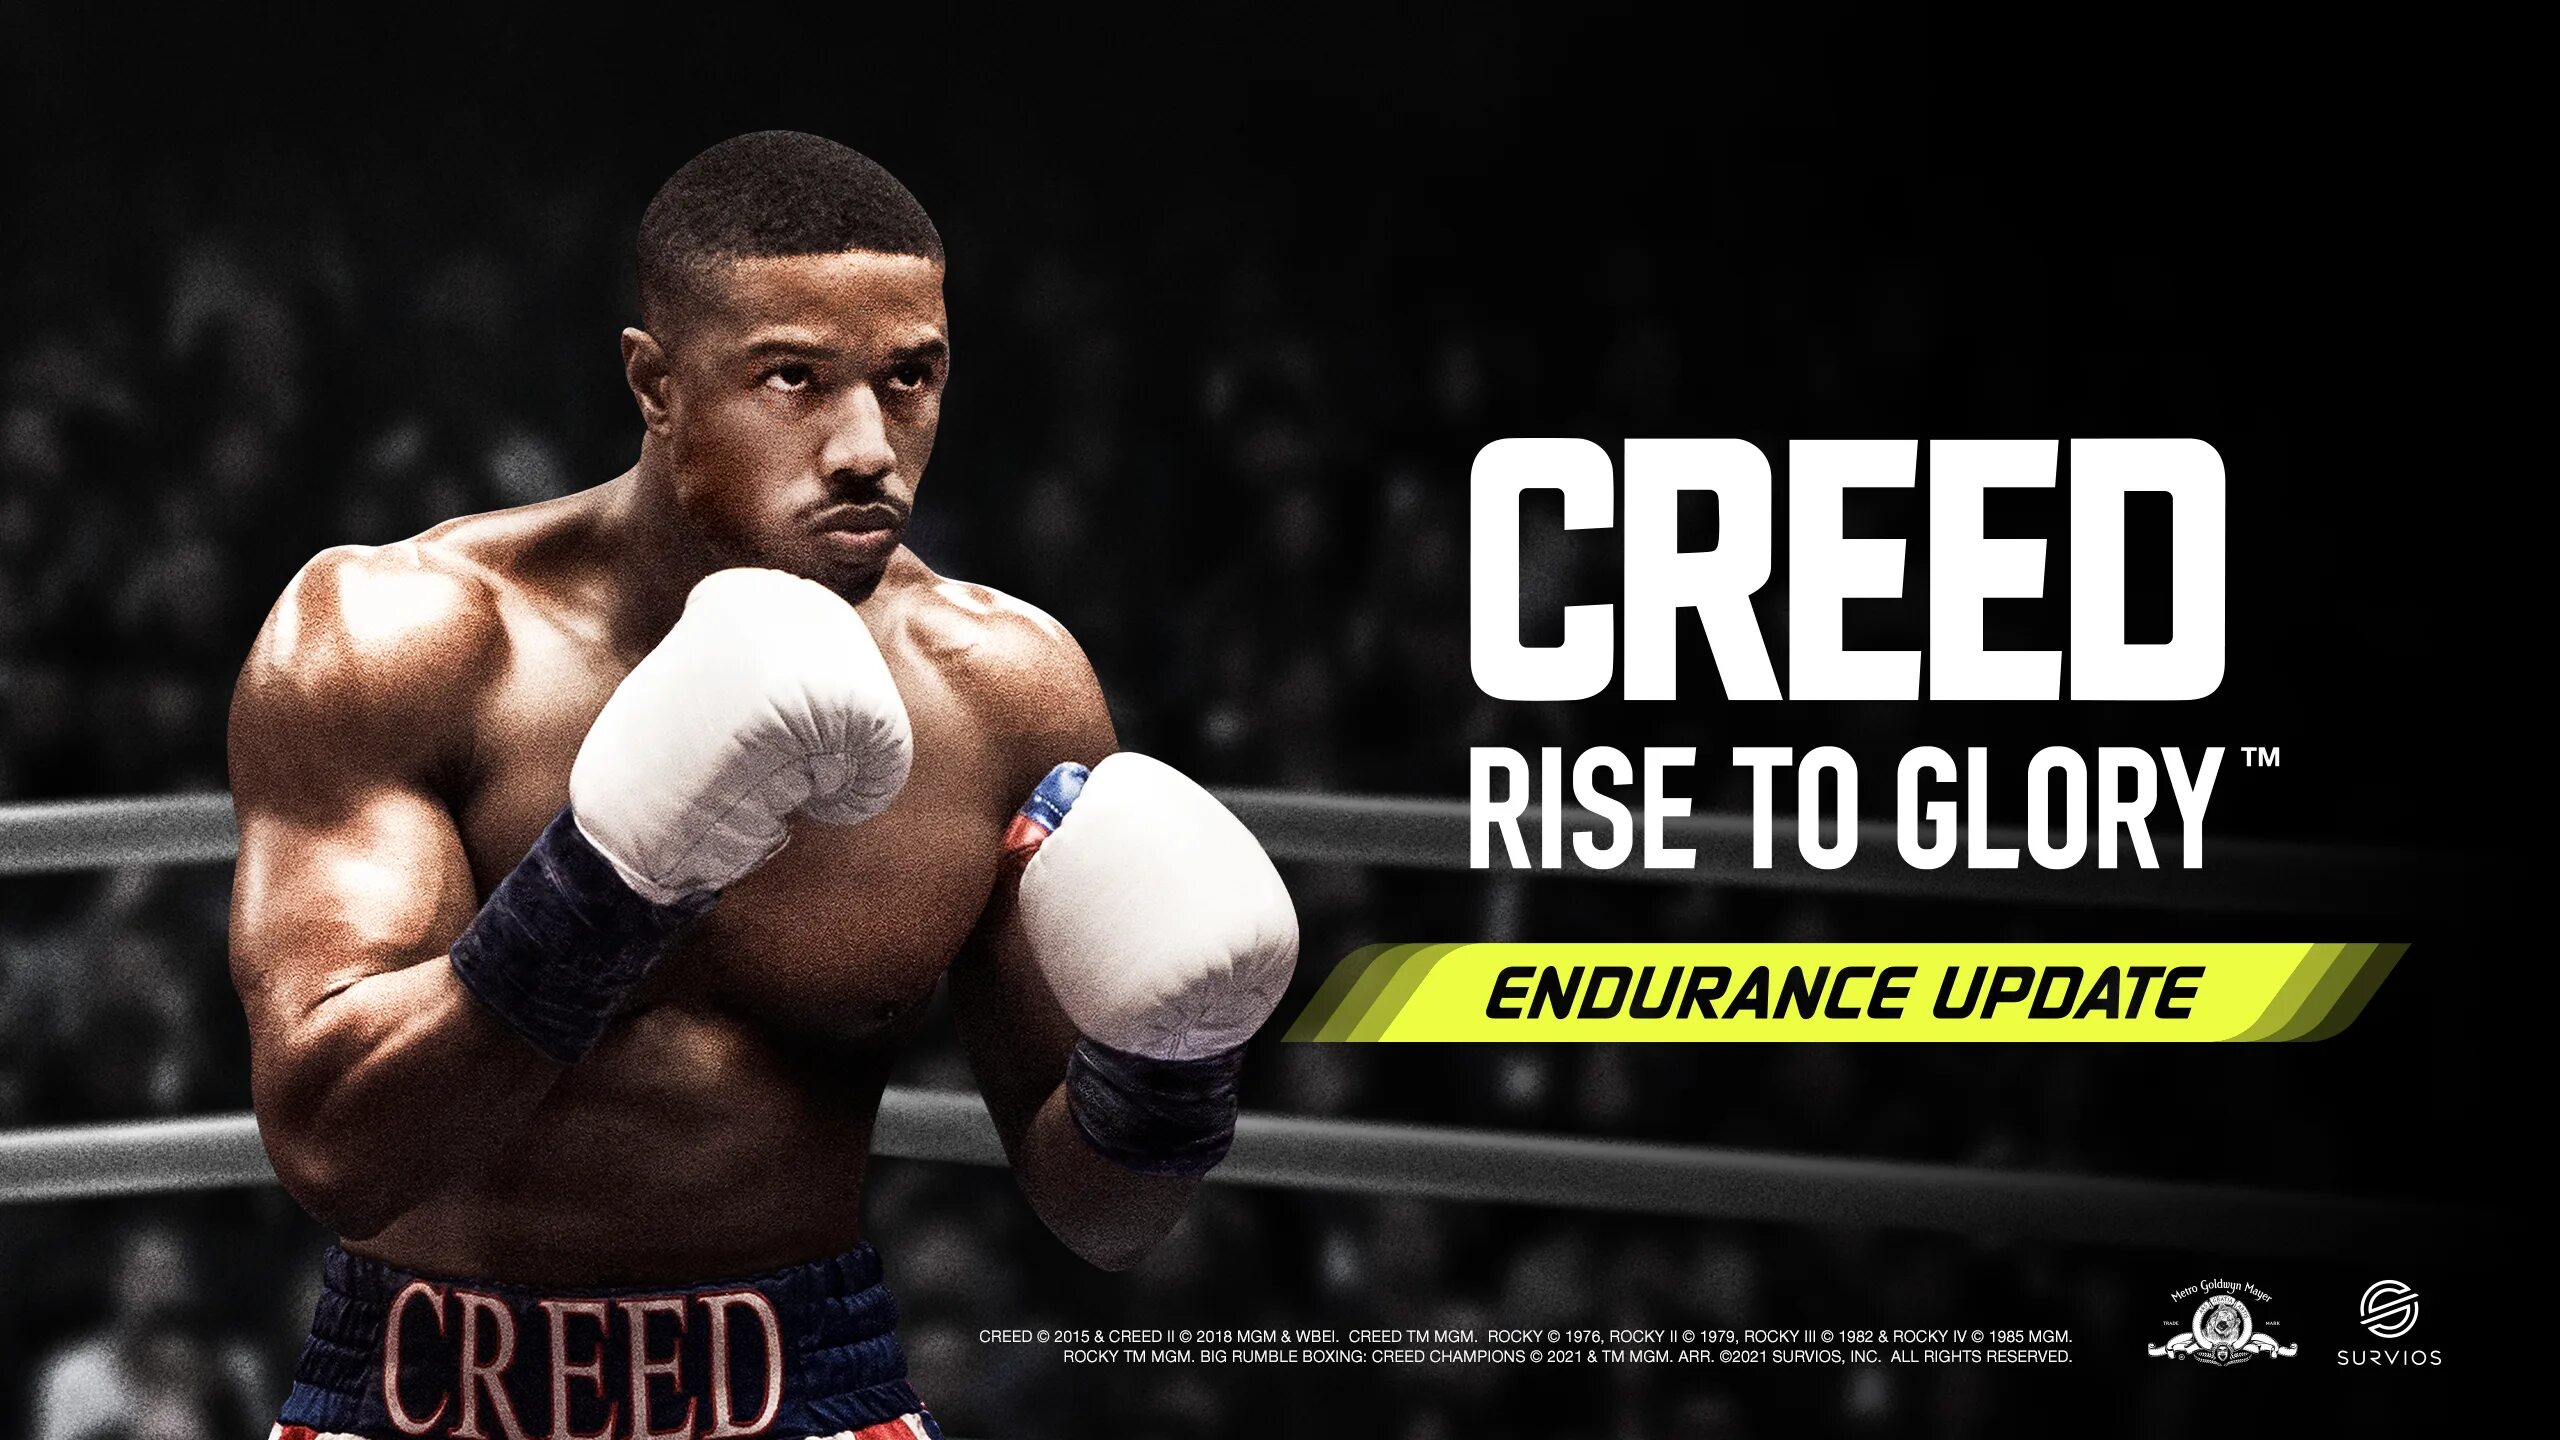 Oculus Quest 2 Creed. Creed Rise to Glory VR Oculus Quest 2. Бокс Oculus Quest 2. Creed Box 3 VR.